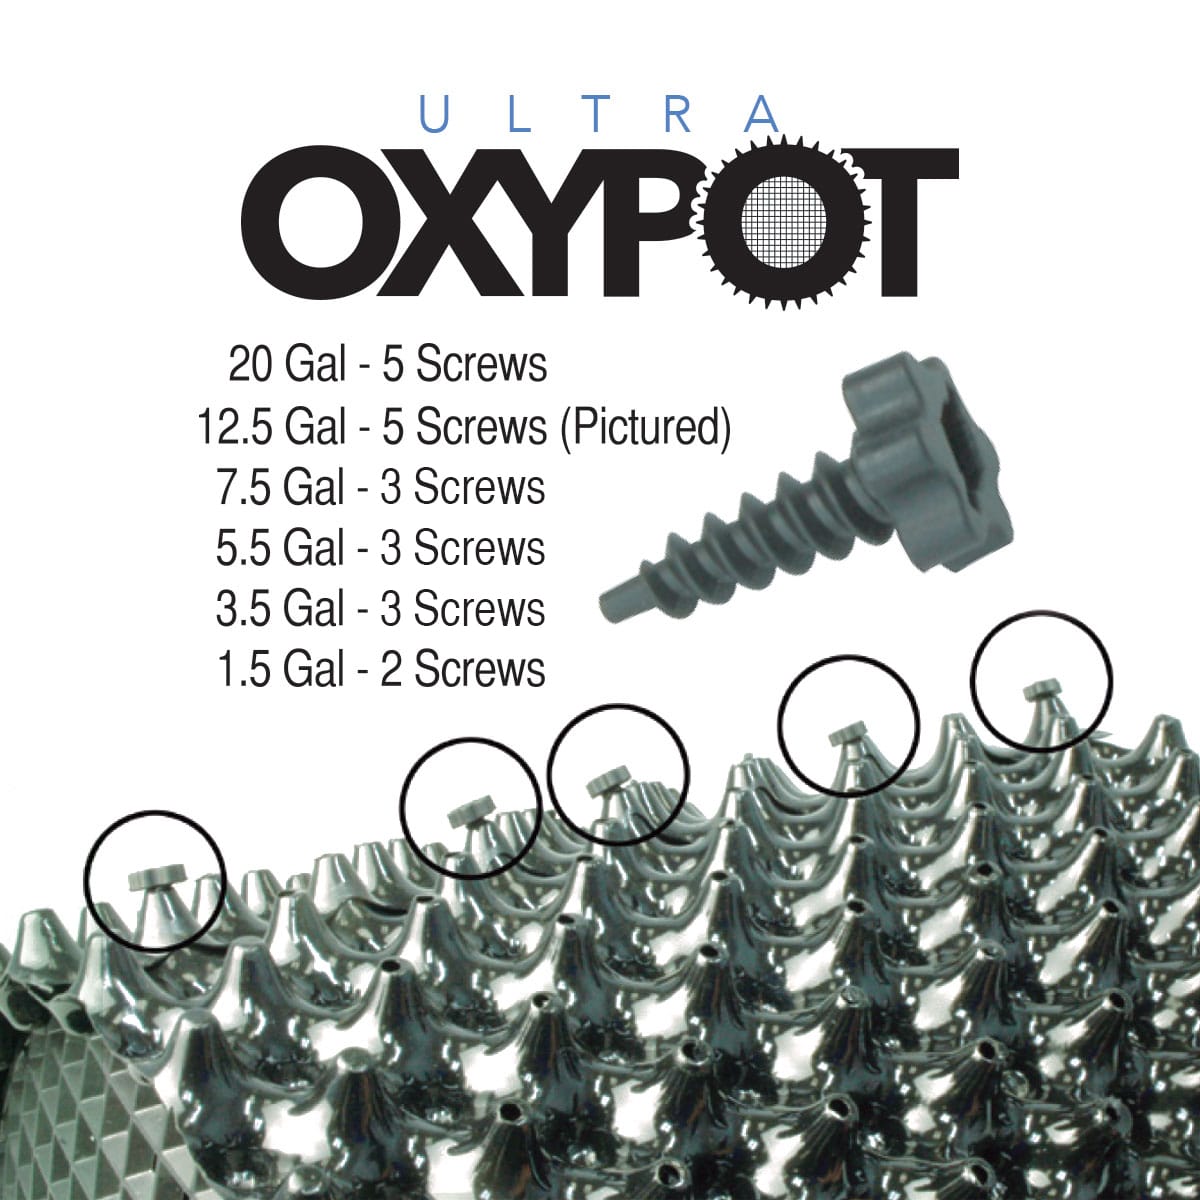 Oxypot Screw Count By Pot Size